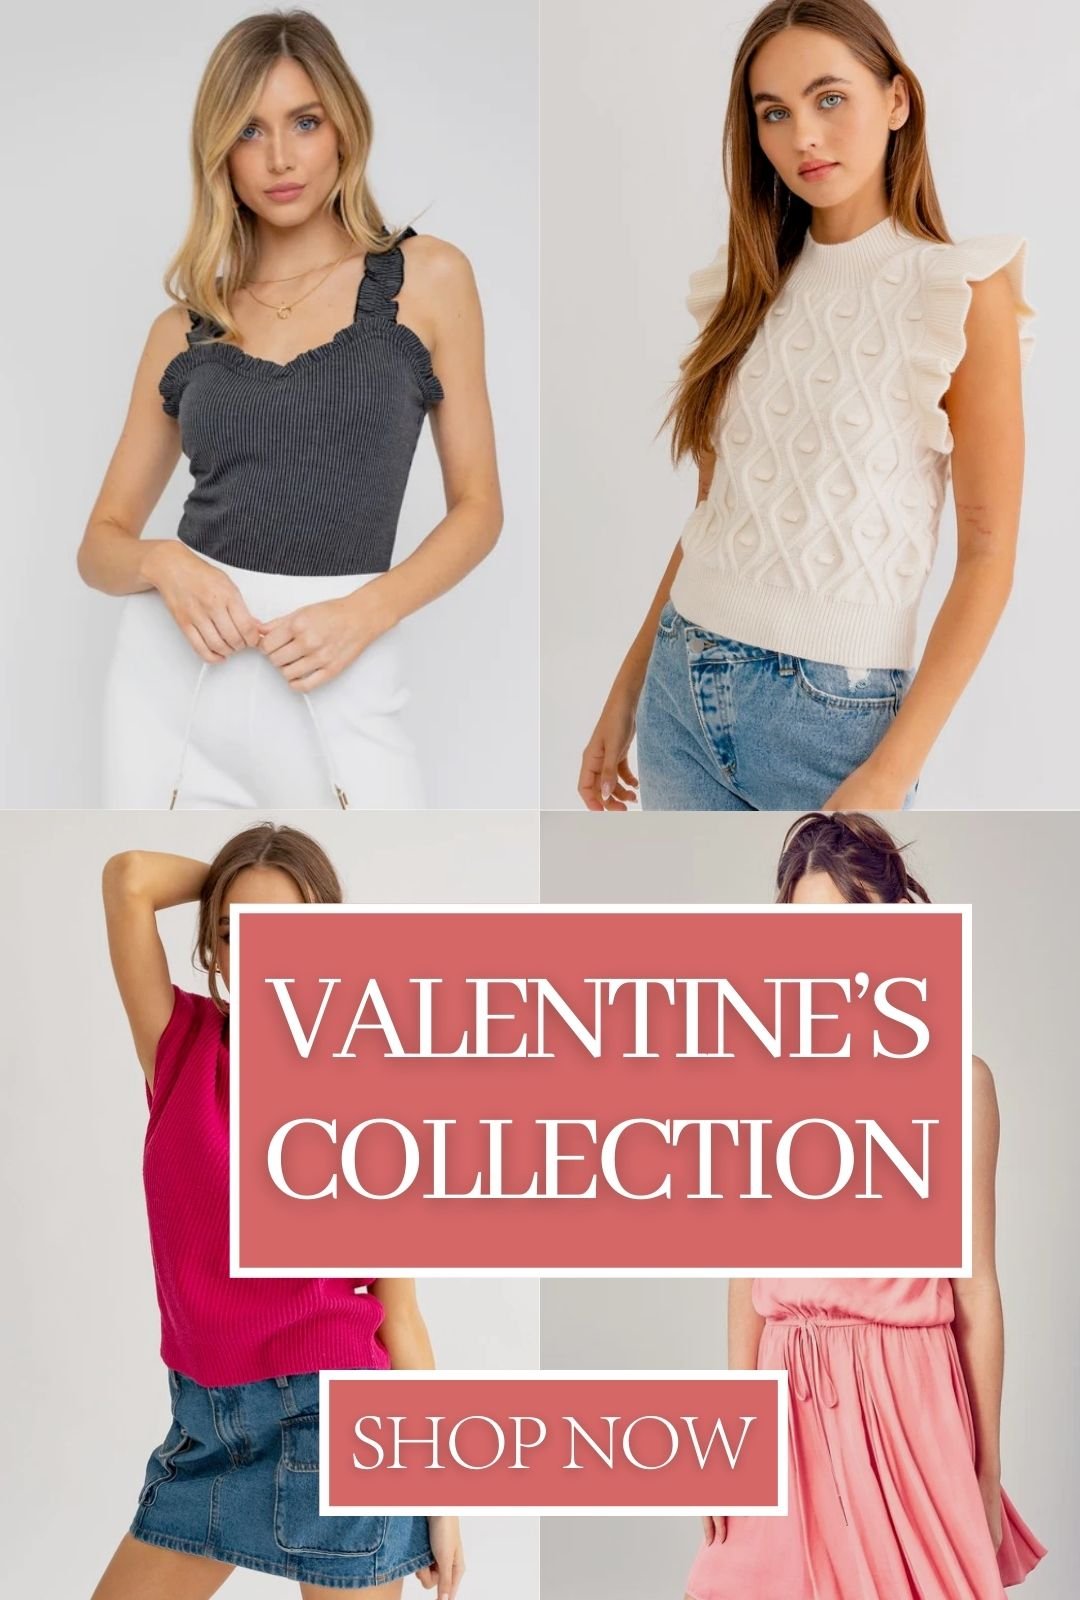 There are four pictures. The top left the woman is wearing a charcoal frilly top with white pants and the top right is wearing a white sweater with ruffle sleeves and blue jeans. The model on the bottom left is wearing a hot pink turtle neck sweater with short sleeves and a jean skirt, and the right image is of a woman in a light pink dress. There are two pink and white boxes and one says valentines collection and the other says shop now.